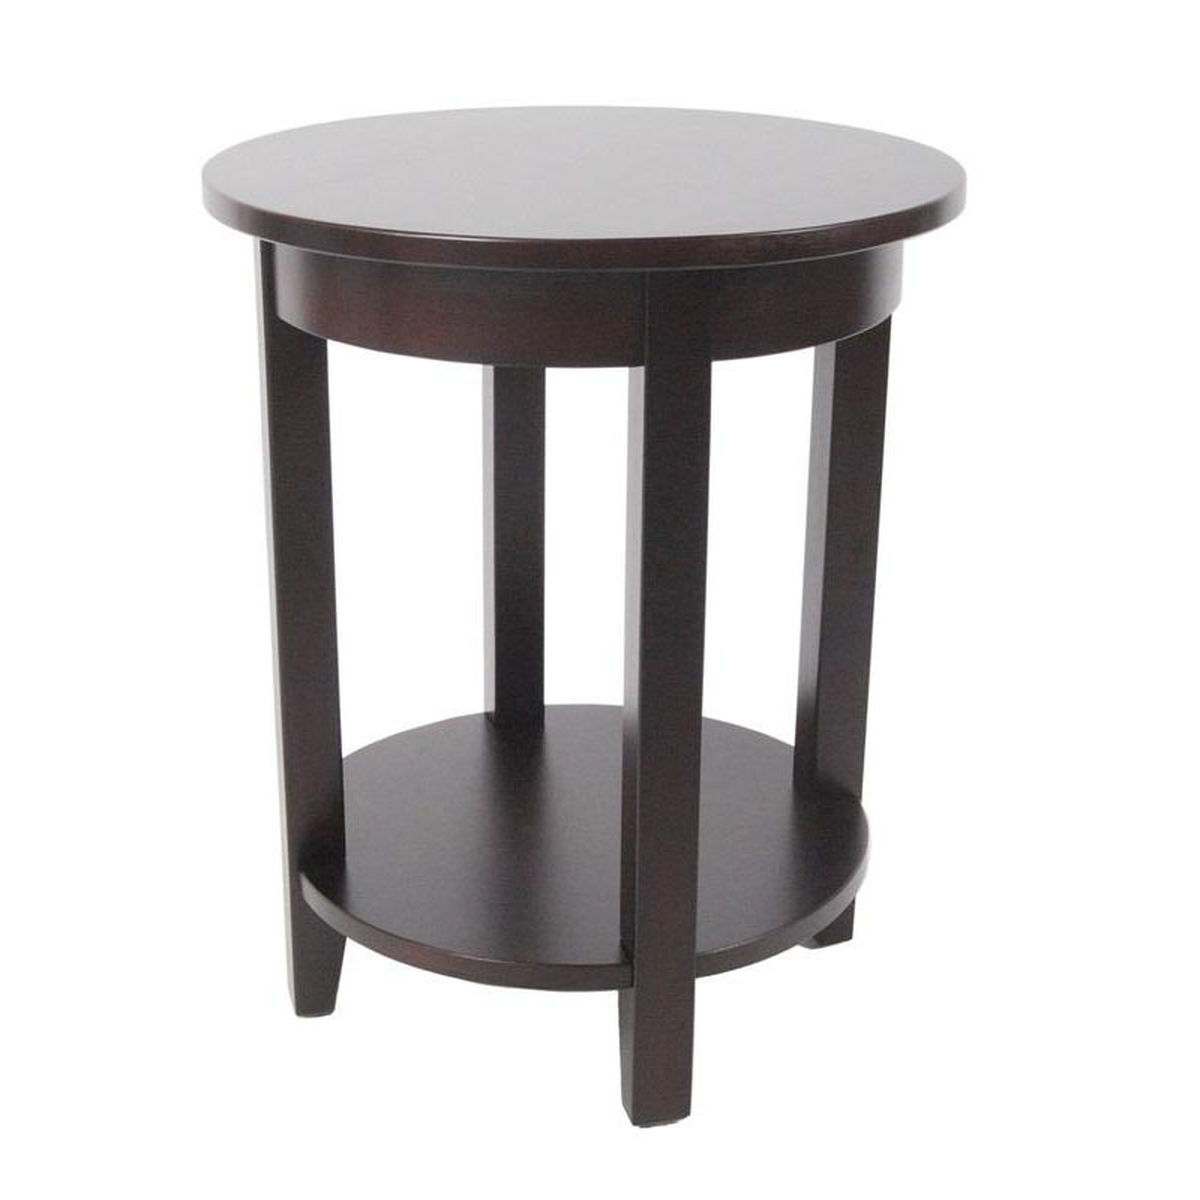 espresso round accent table bizchair bolton furniture bol main with storage our shaker cottage wooden diameter shelf metal nightstand bedroom tables hammered top coffee cement